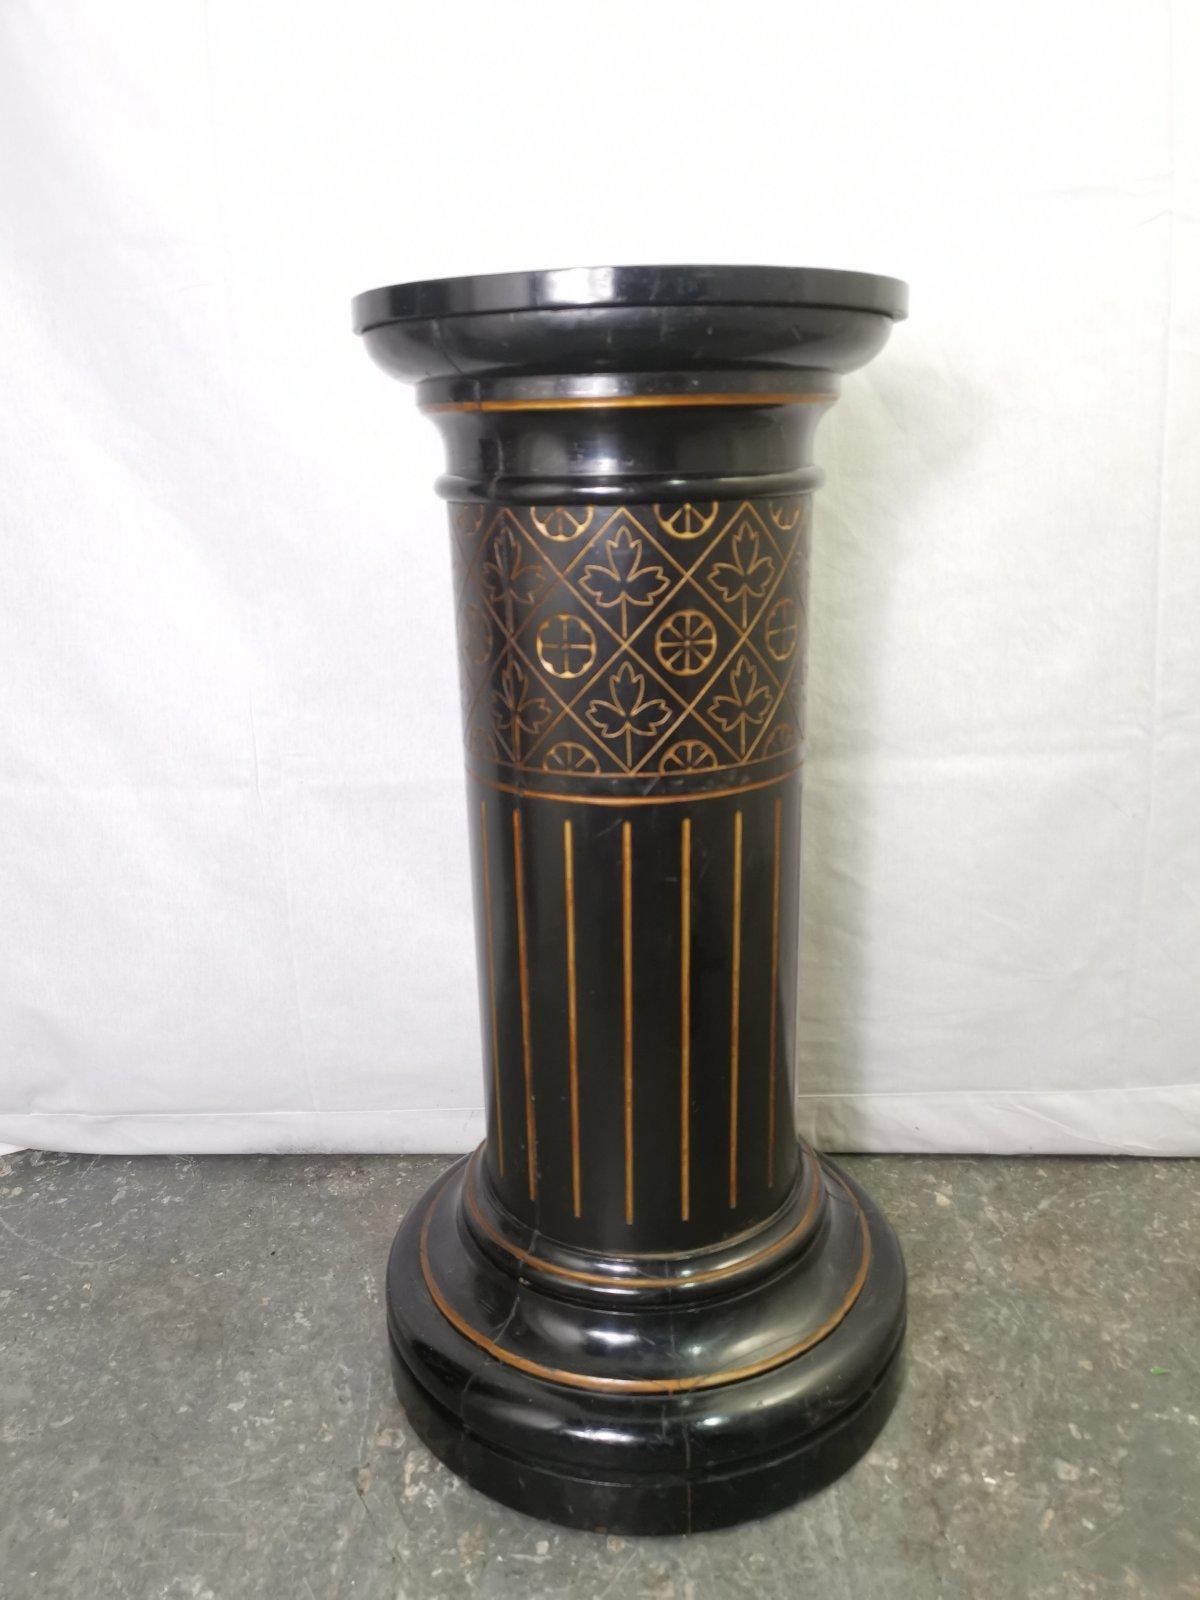 In style of Dr C Dresser for Bushloe House.
An Aesthetic movement, circular ebonized pedestal torchière or stand, with close carved gilded florets alternating with leaves and lower line decoration.
Images are of all sides.